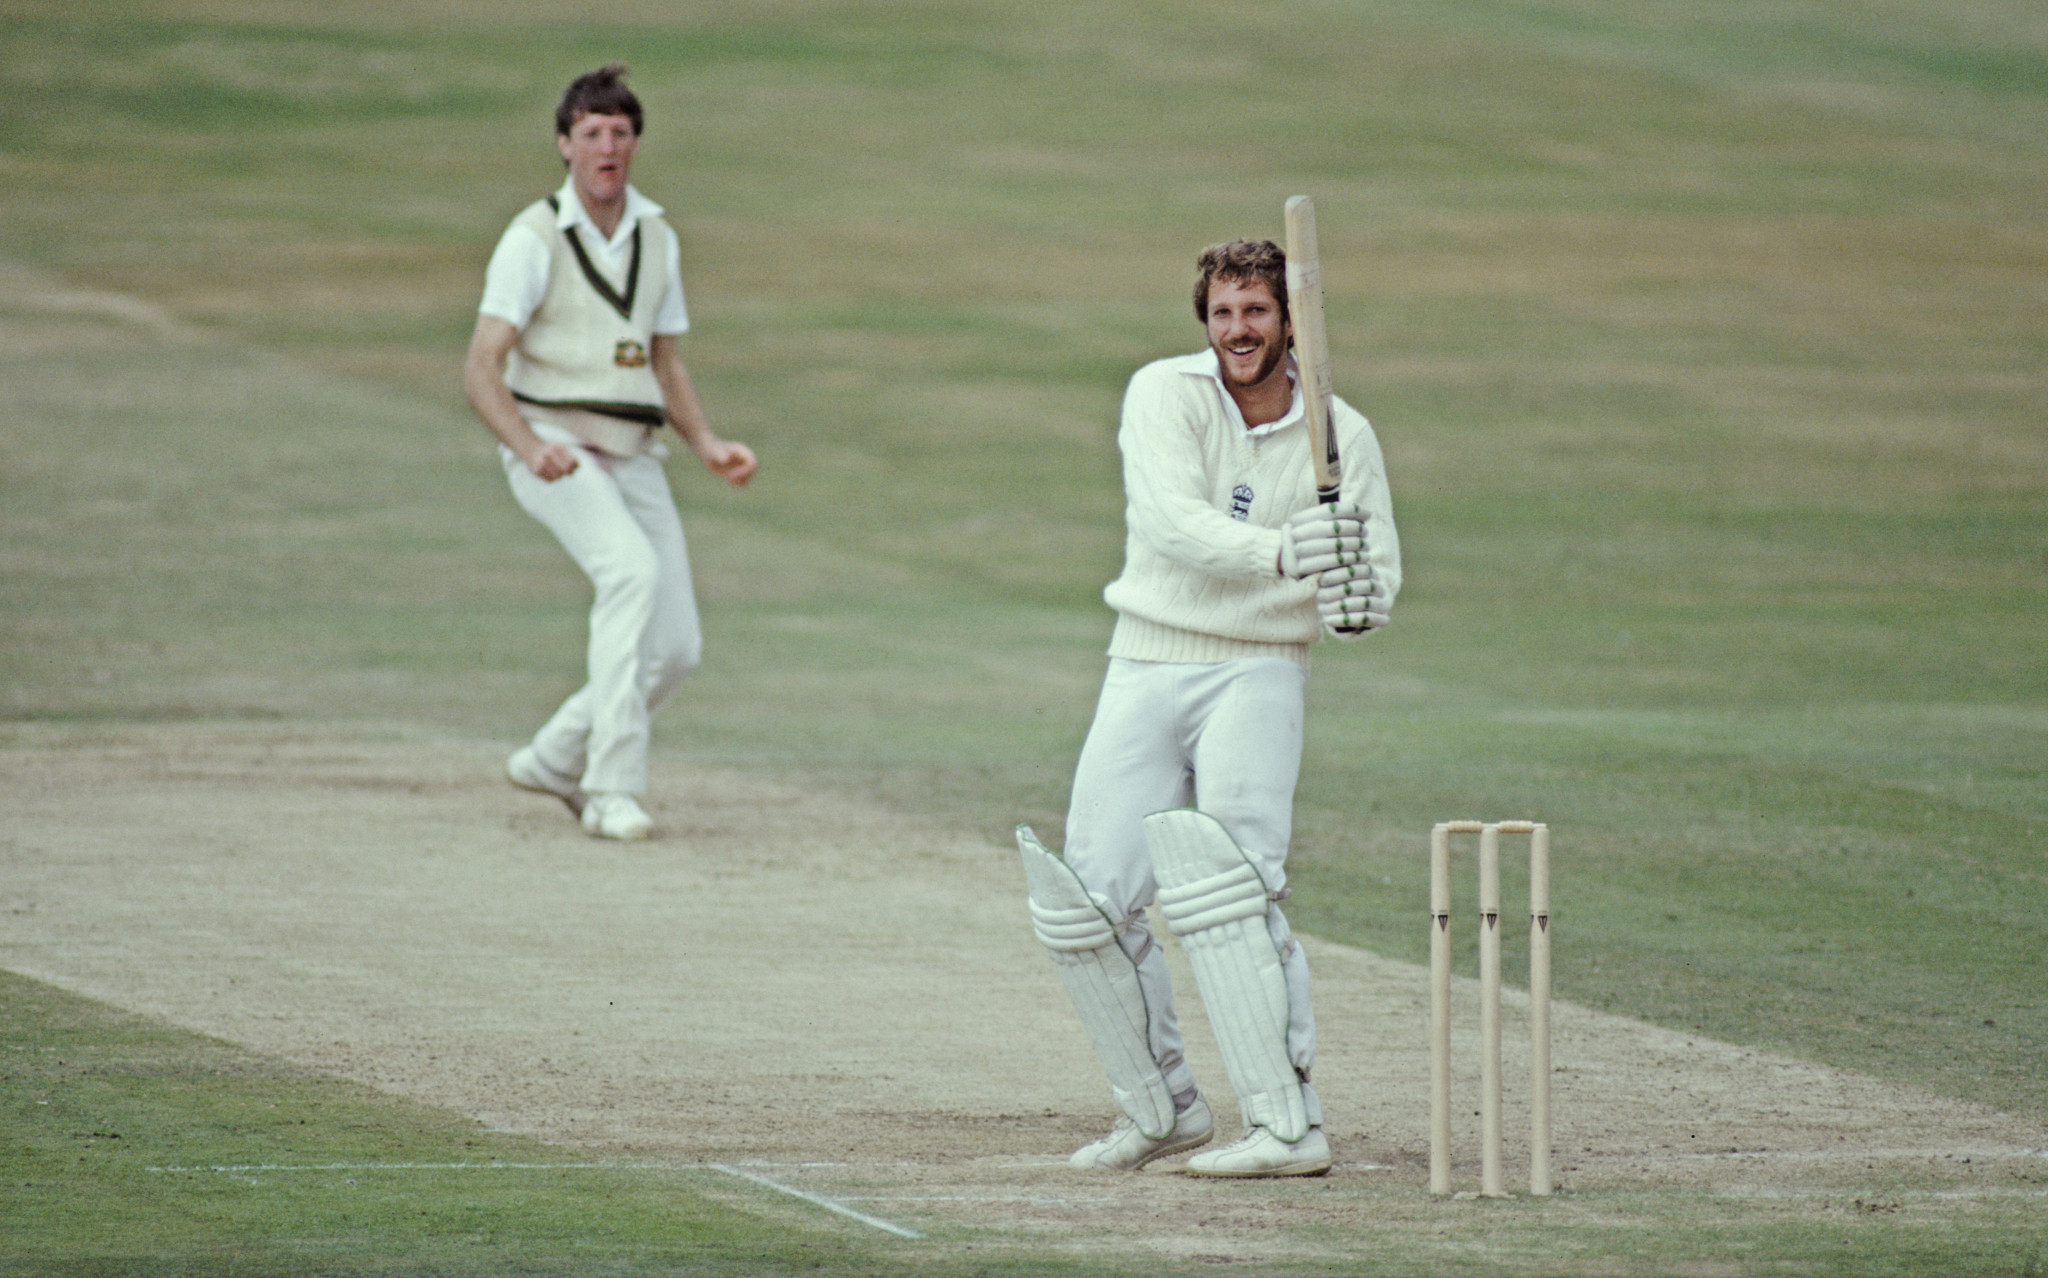 Sir Ian Botham's heroics with bat and ball inspired England to a 3-1 win in the 1981 Ashes Series ©Getty Images 